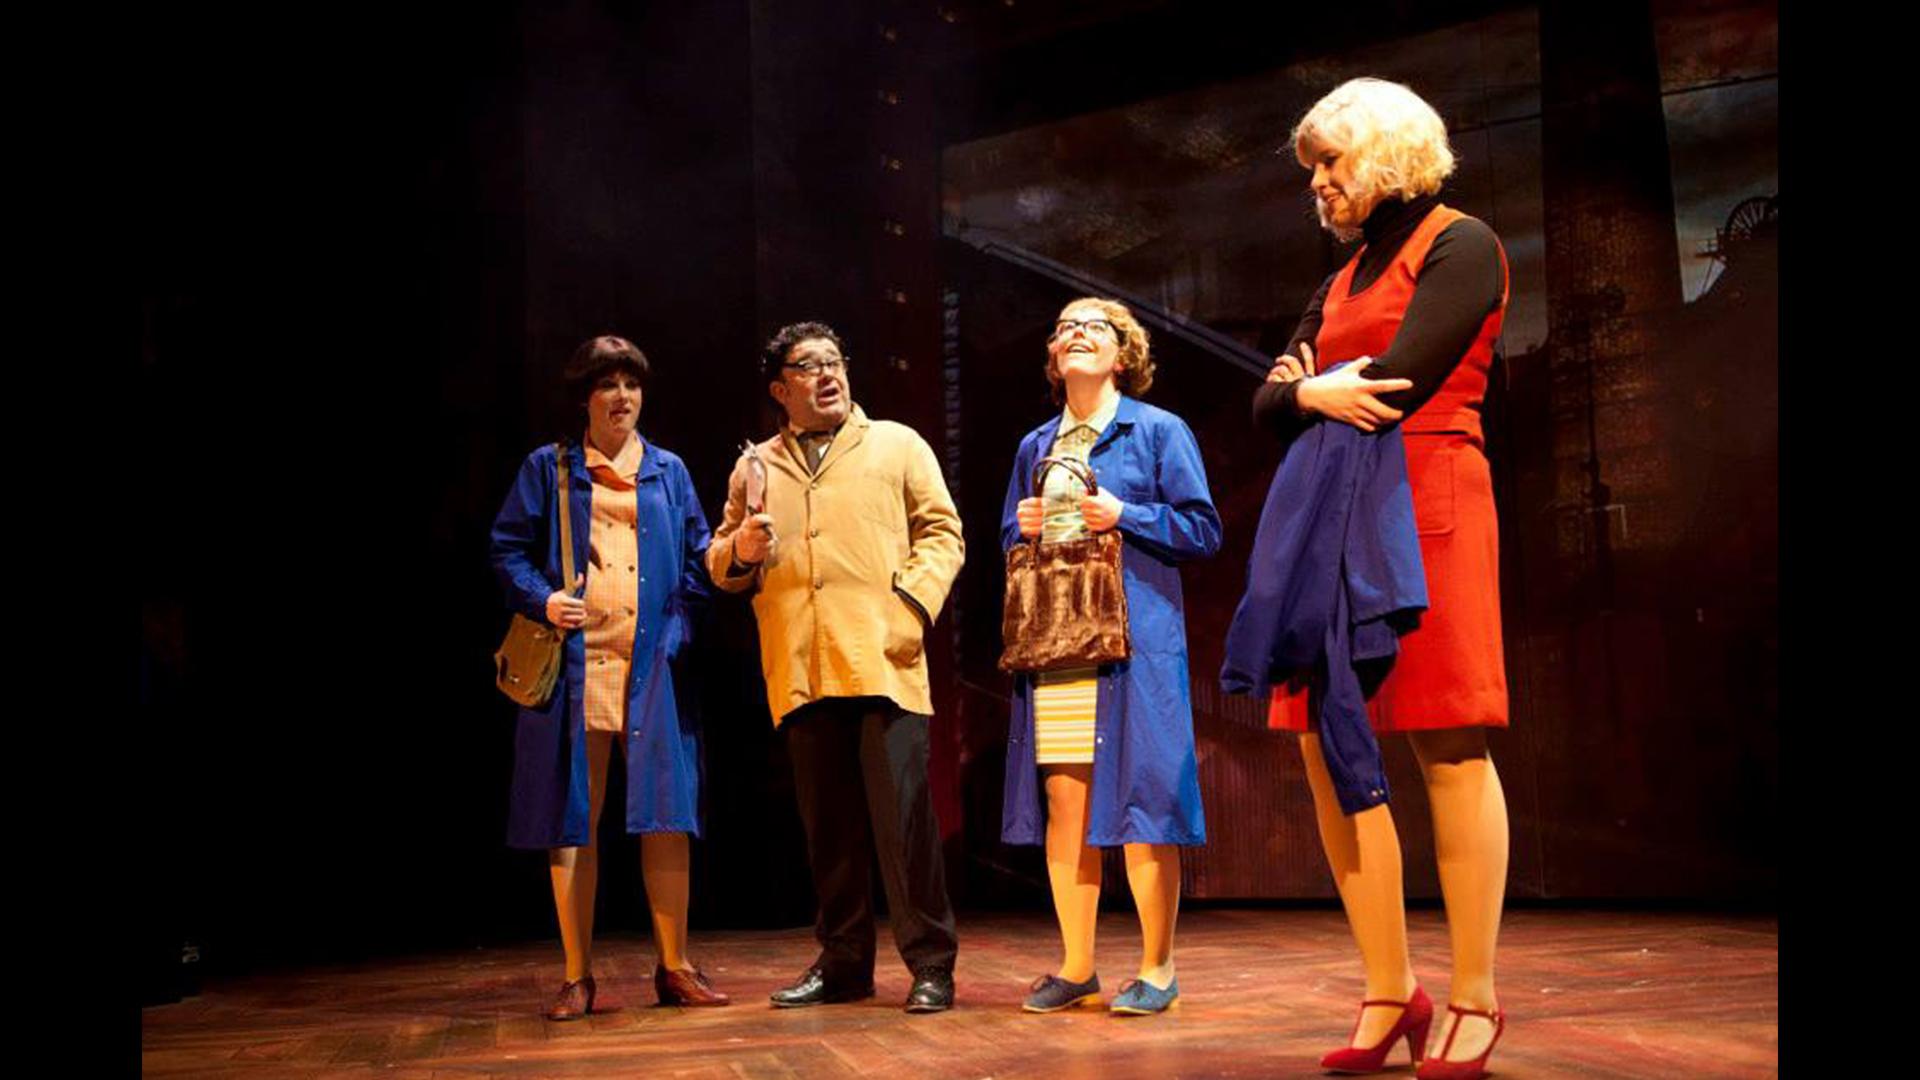 Two women and a man in work overcoats talking to a woman in a red dress